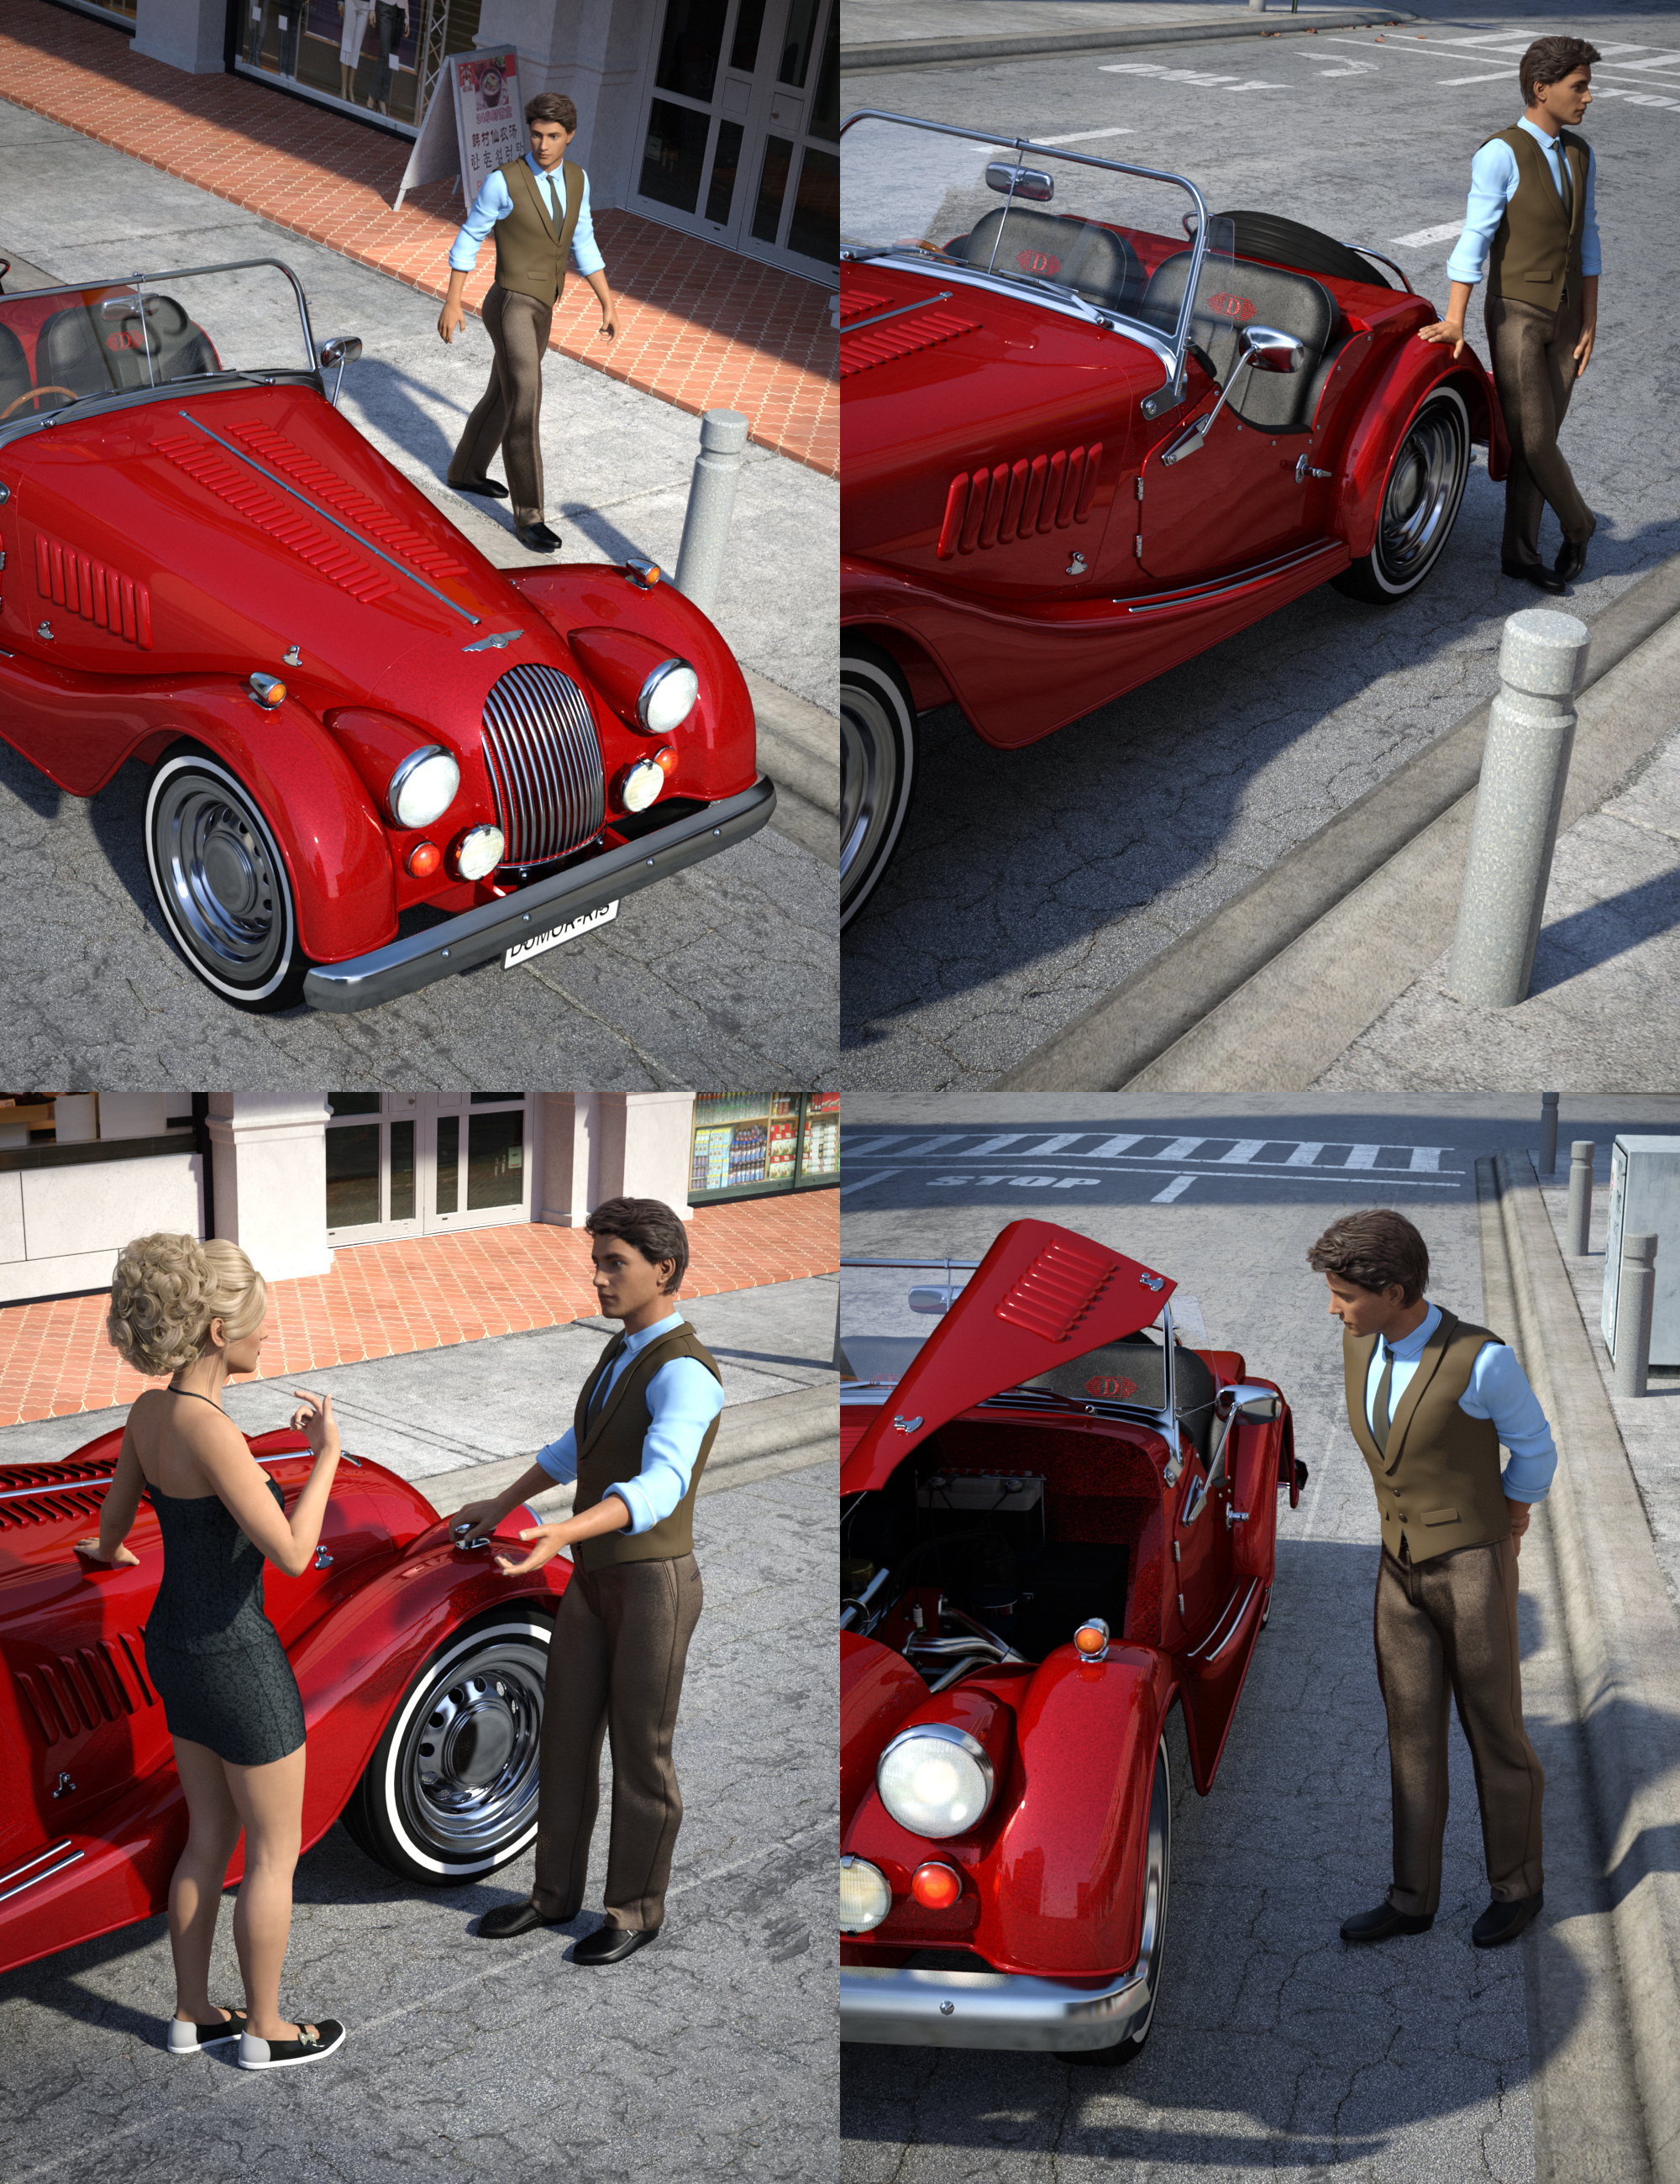 Sports Car Morris Poses by: Three Wishes, 3D Models by Daz 3D